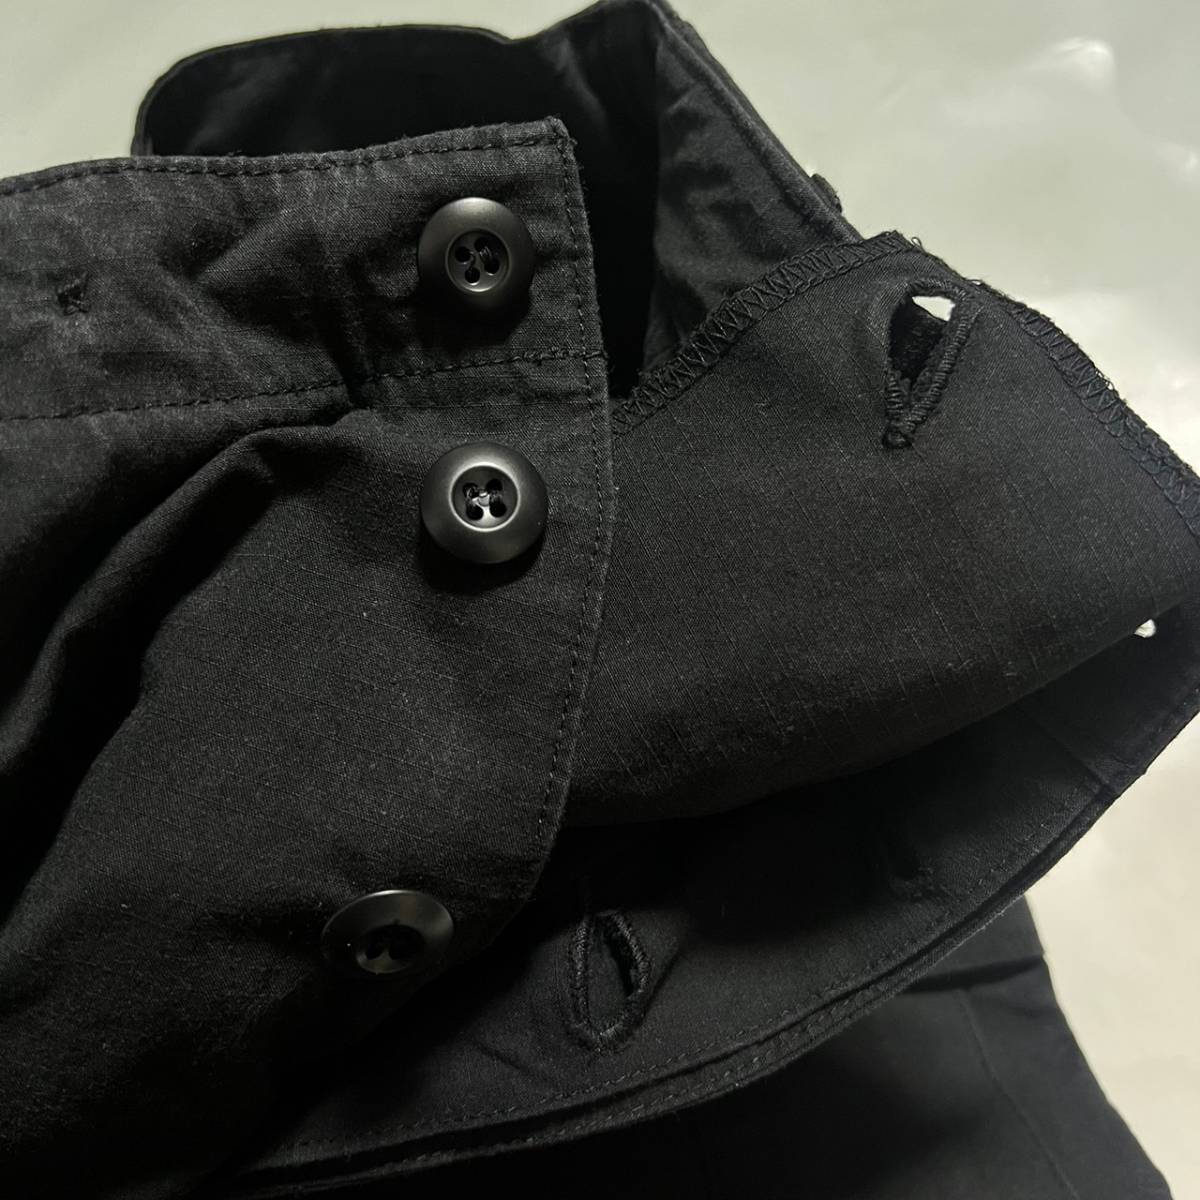 wtaps WVGT-PTM01 WMILL-65 TROUSER/TROUSERS.NYCO.SATIN WTaps брюки брюки-карго черный 02